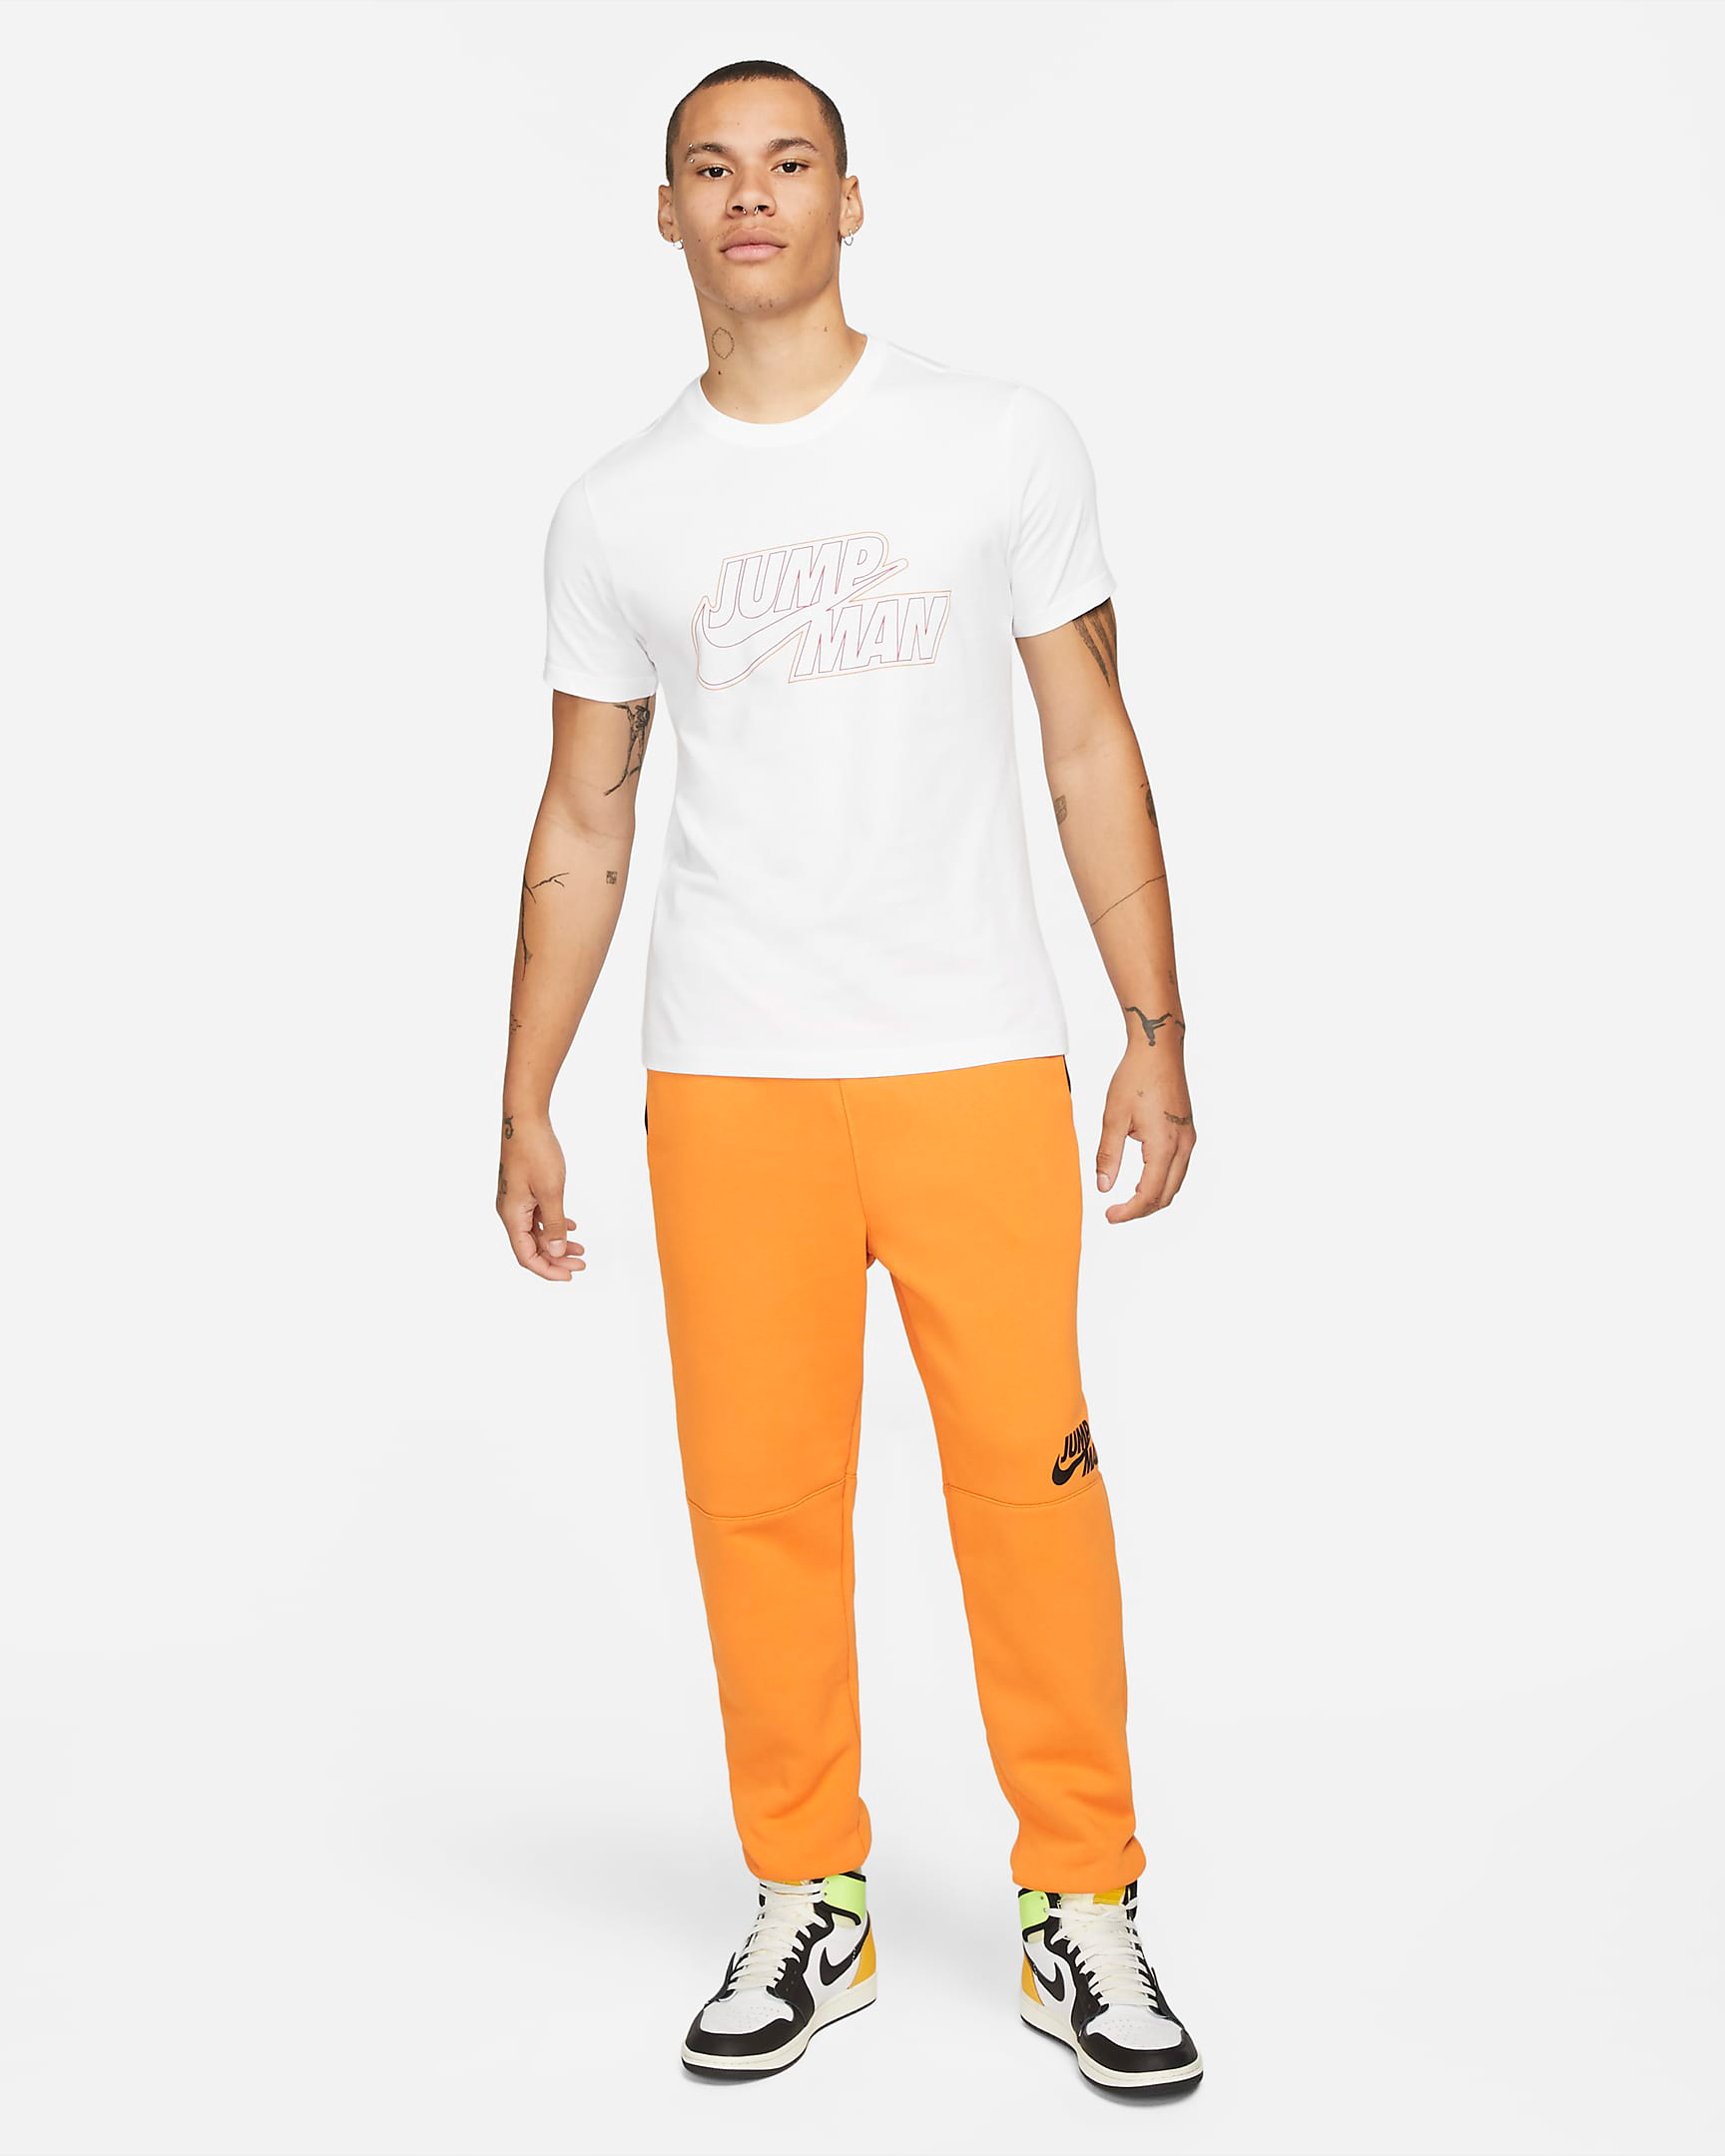 jordan-light-curry-sneaker-clothing-outfit-4